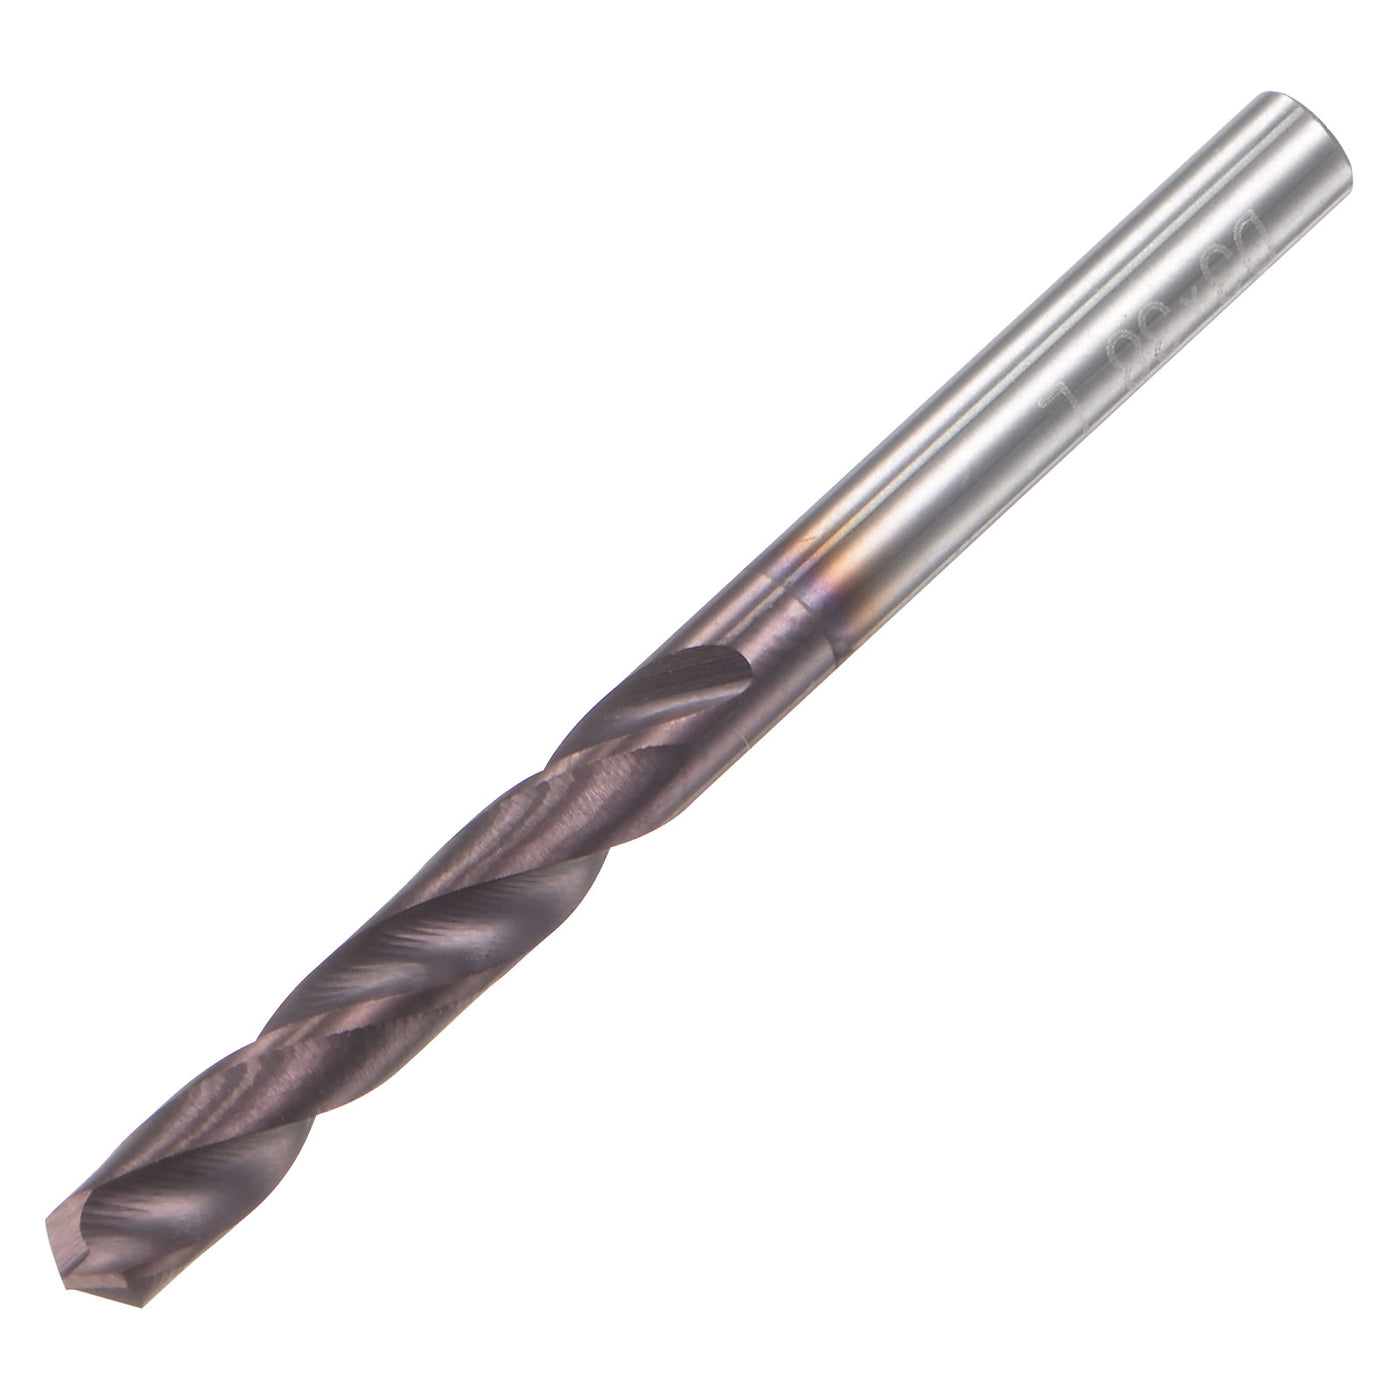 uxcell Uxcell 3mm DIN K45 Tungsten Carbide AlTiSin Coated Drill Bit for Stainless Steel